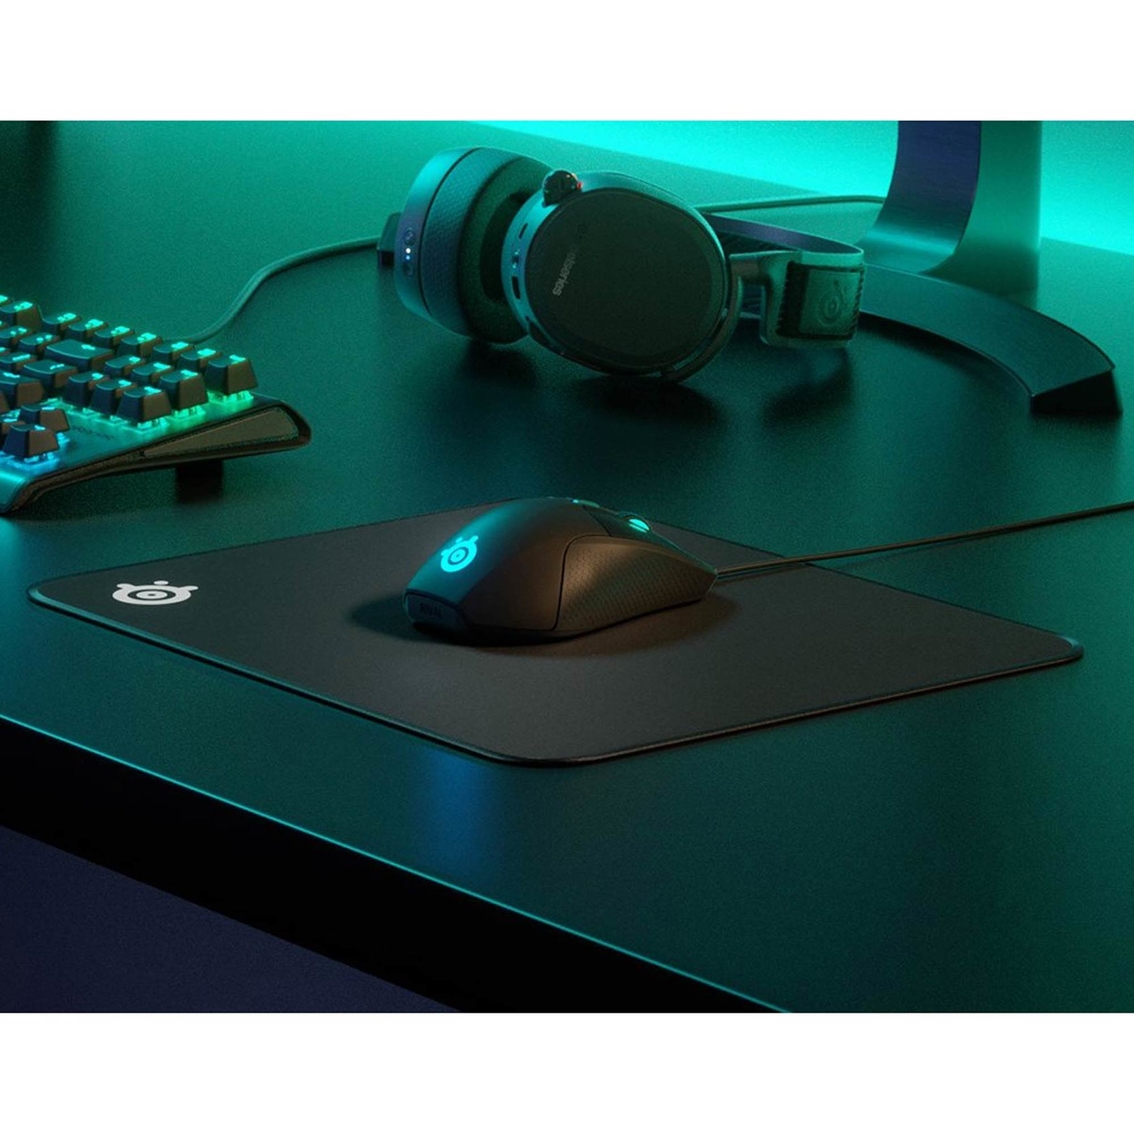 Steelseries Qck Edge Large Gaming Surface - Image 4 of 4